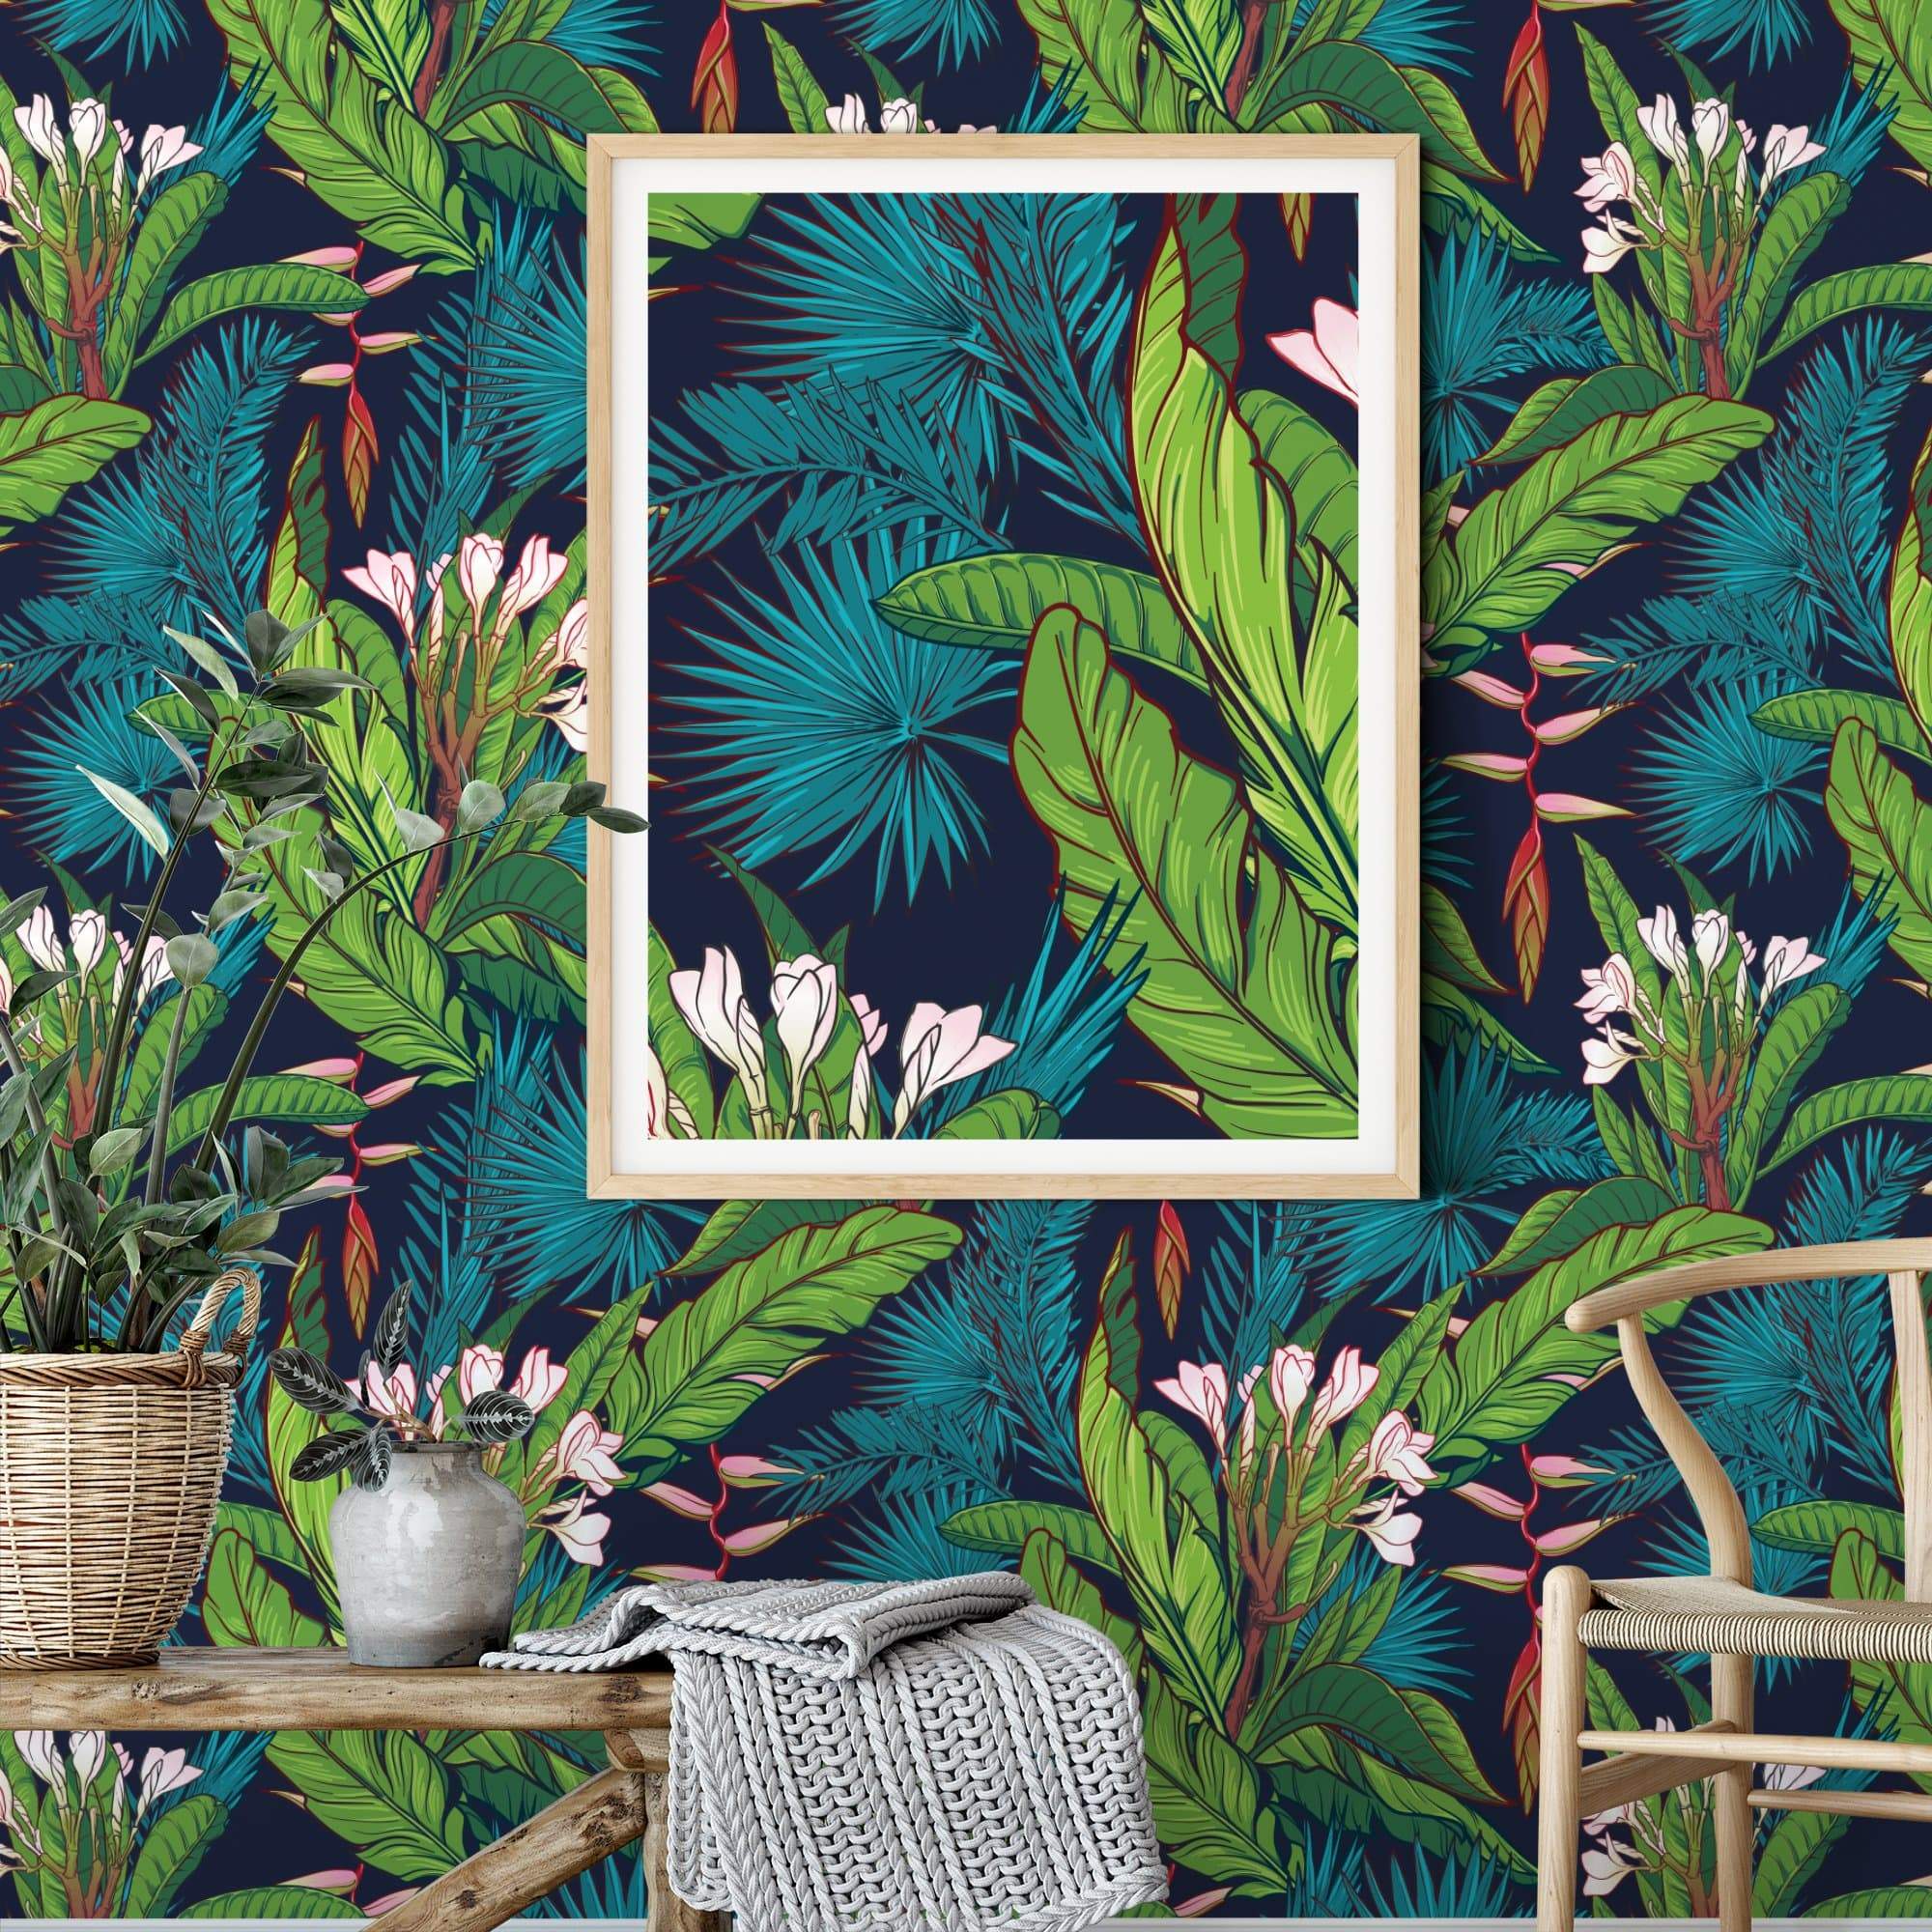 NextWall 3075sq ft Coastal Blue Vinyl IvyVines Selfadhesive Peel and Stick  Wallpaper in the Wallpaper department at Lowescom